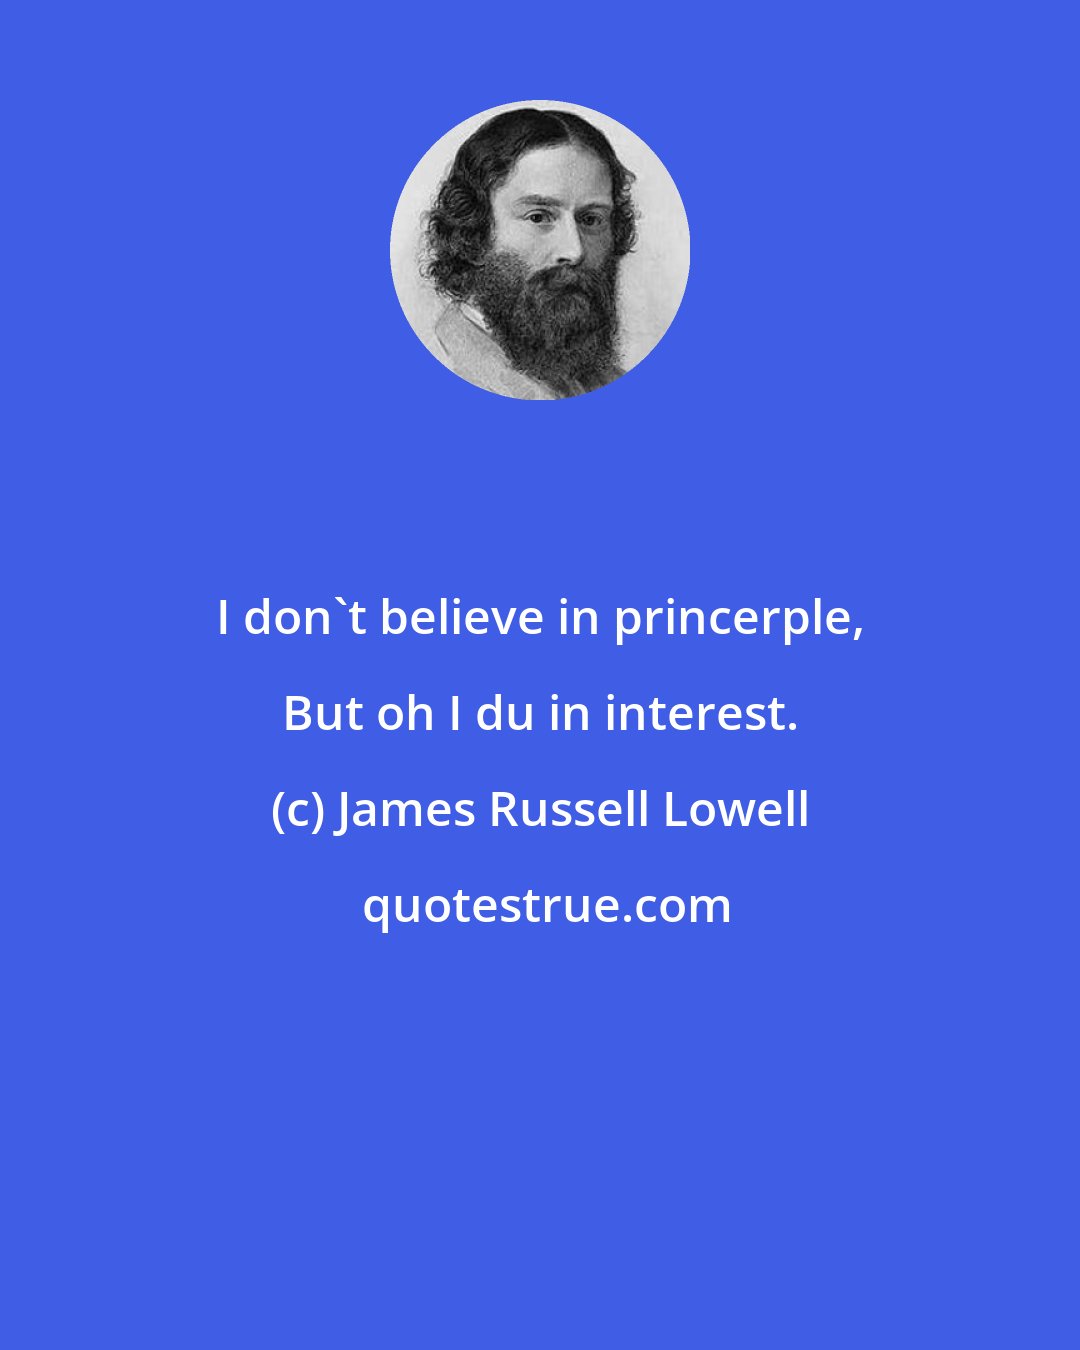 James Russell Lowell: I don't believe in princerple, But oh I du in interest.